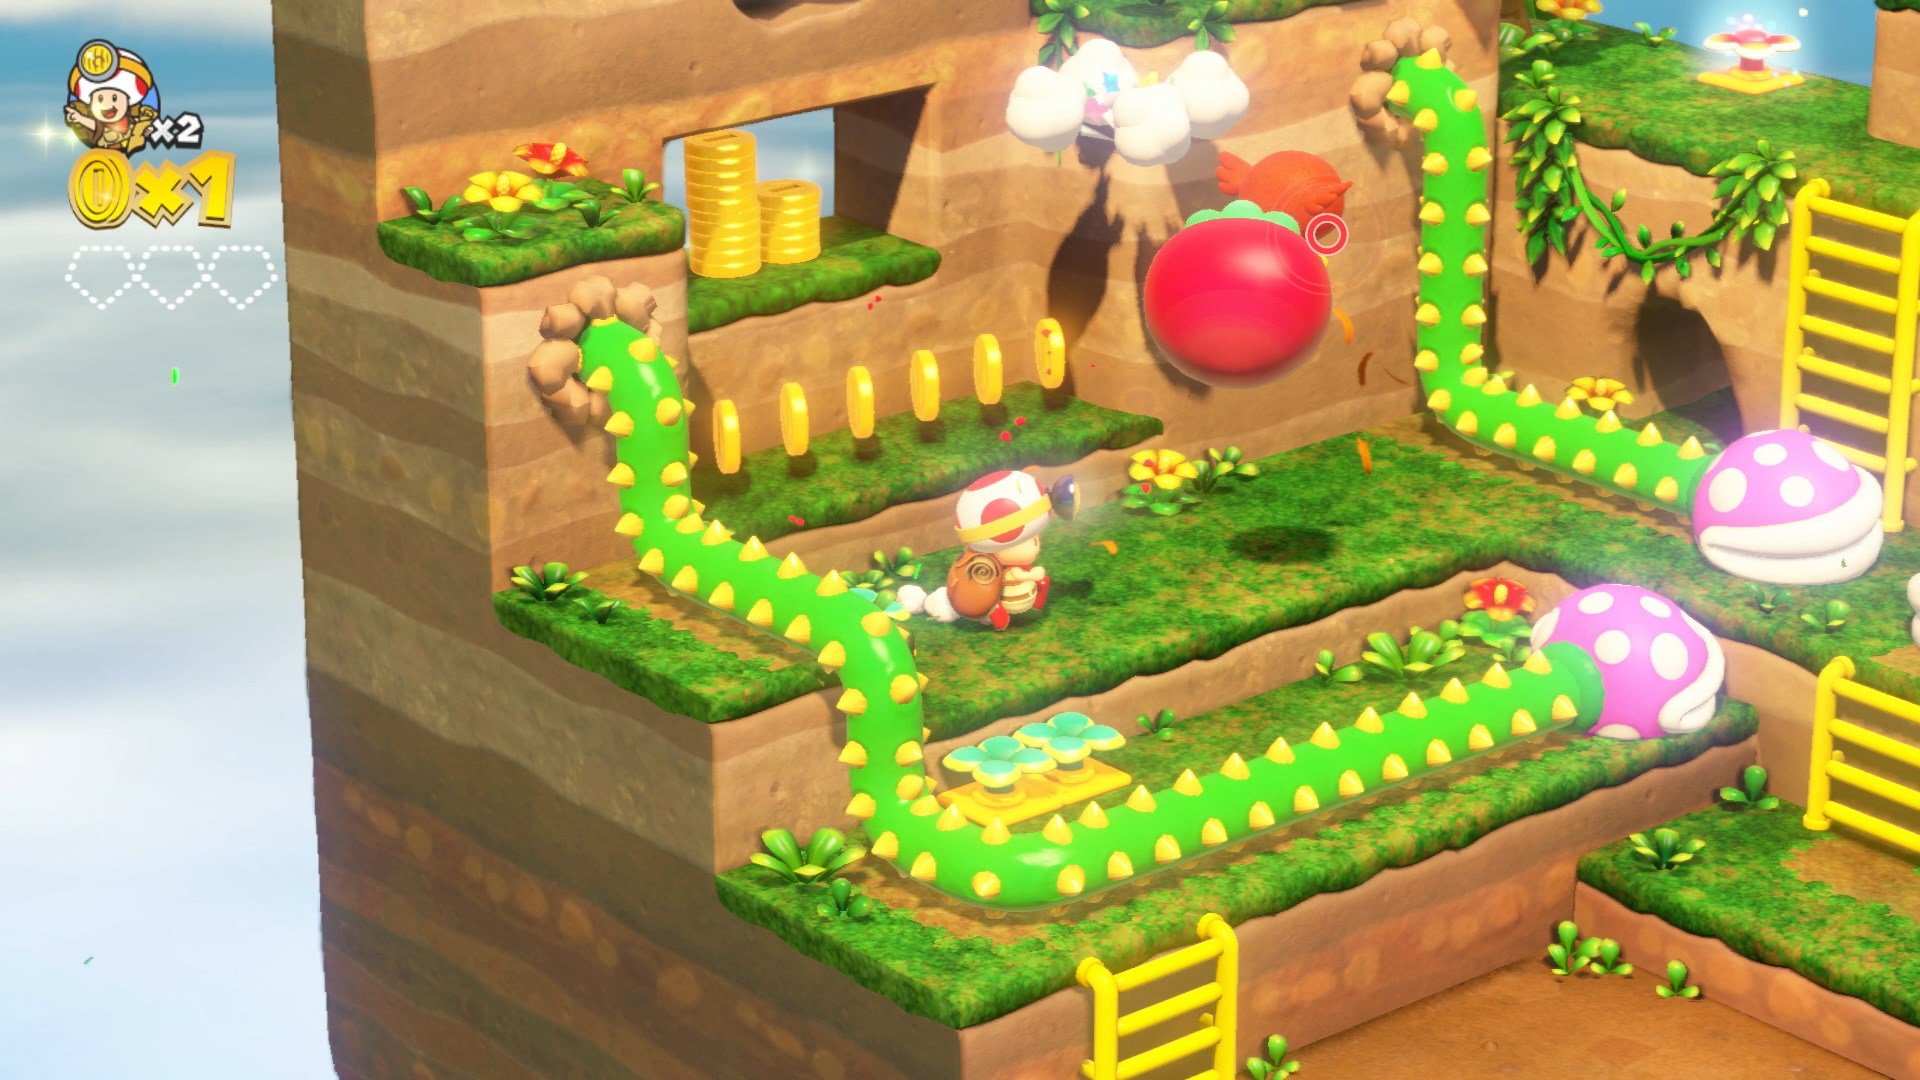 captain toad